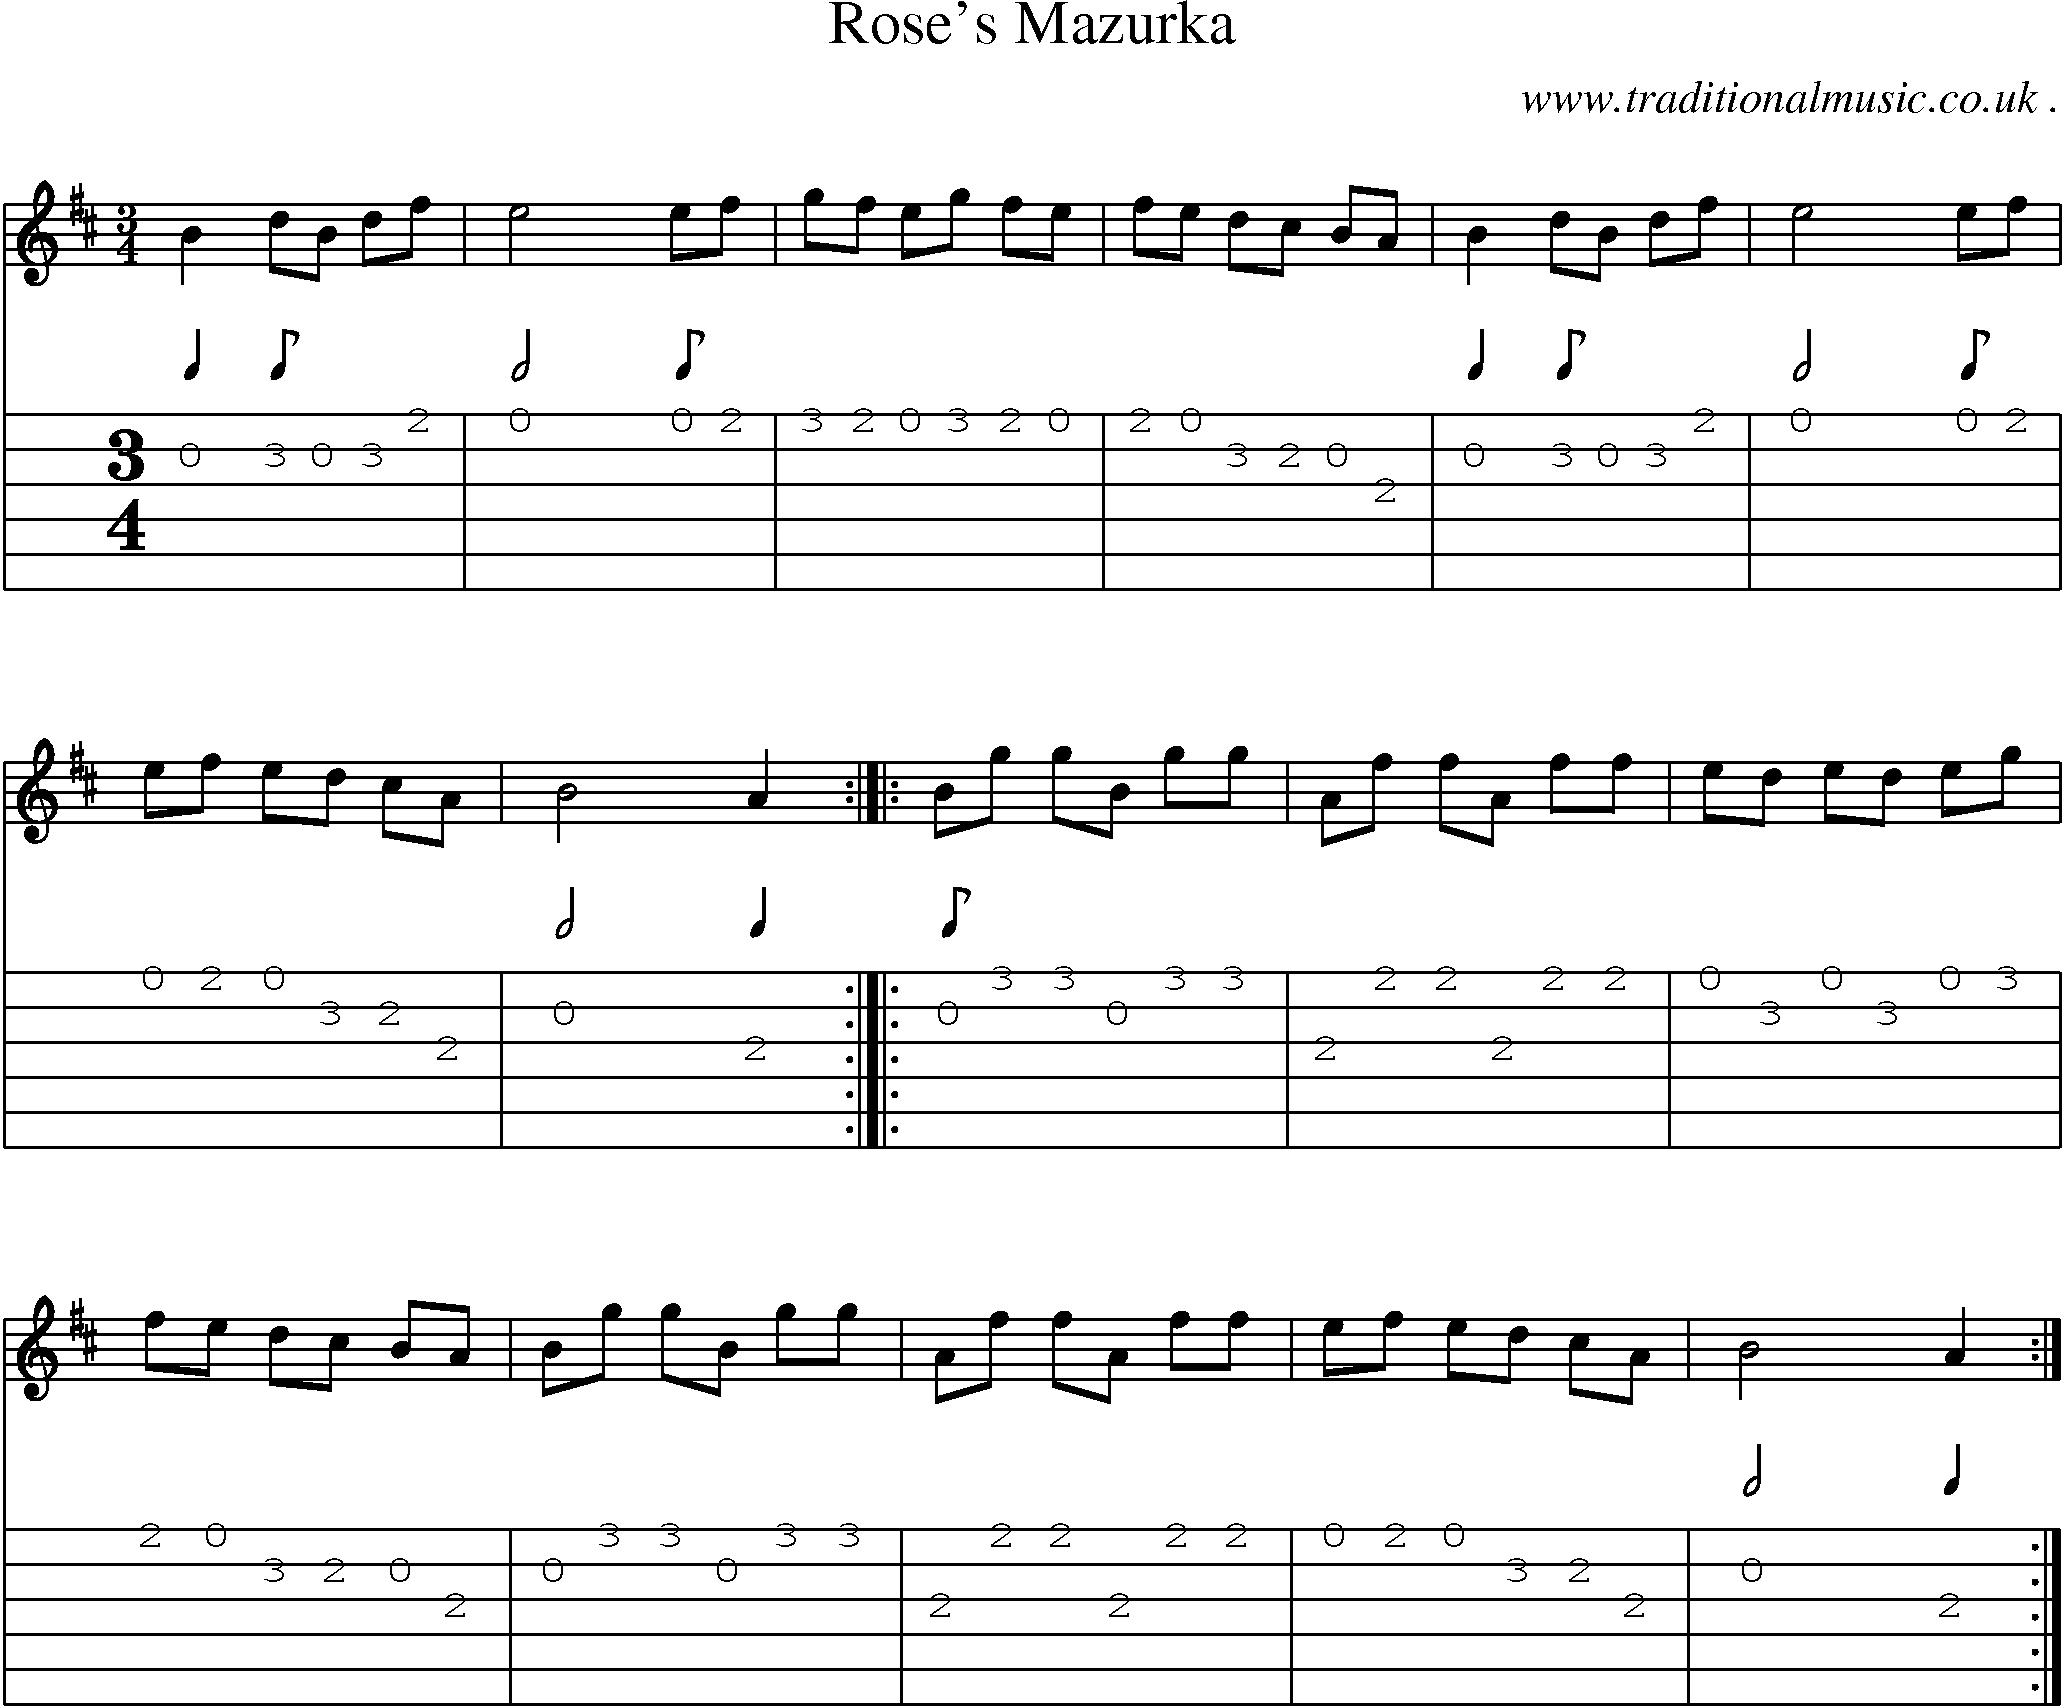 Sheet-Music and Guitar Tabs for Roses Mazurka